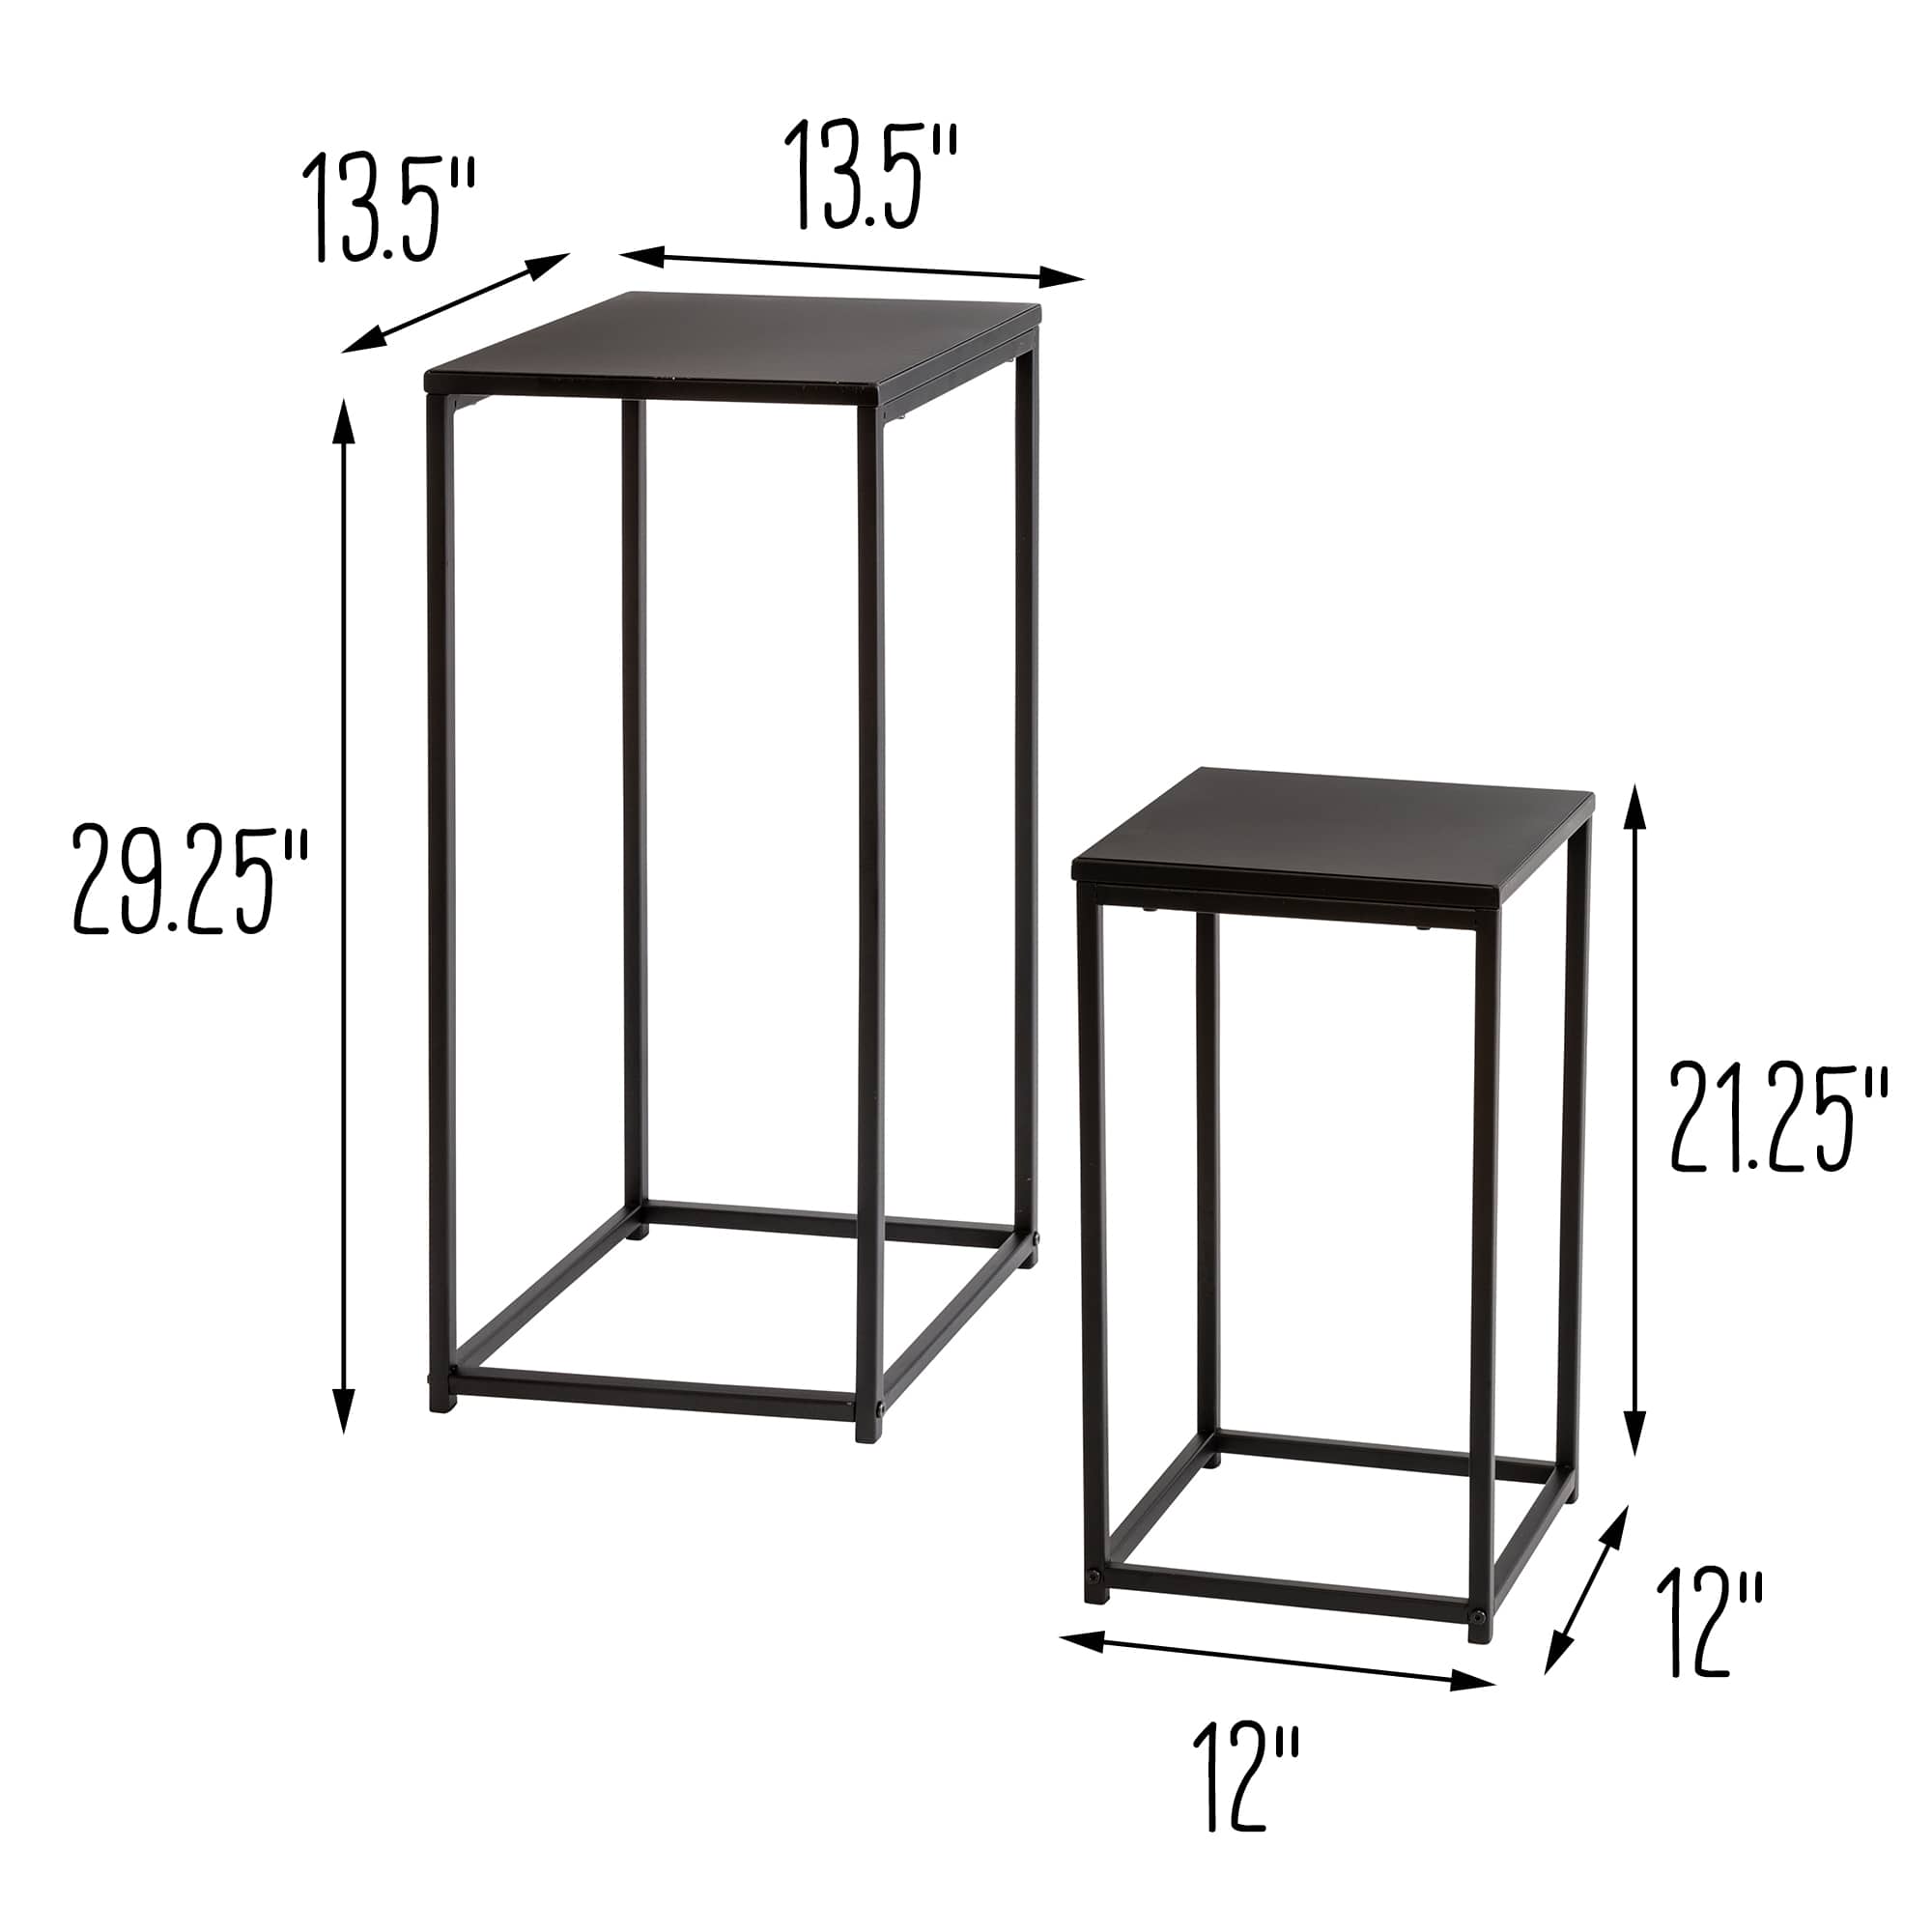 6 Packs: 2 ct. (12 total) Honey Can Do Square Black Side Tables Set